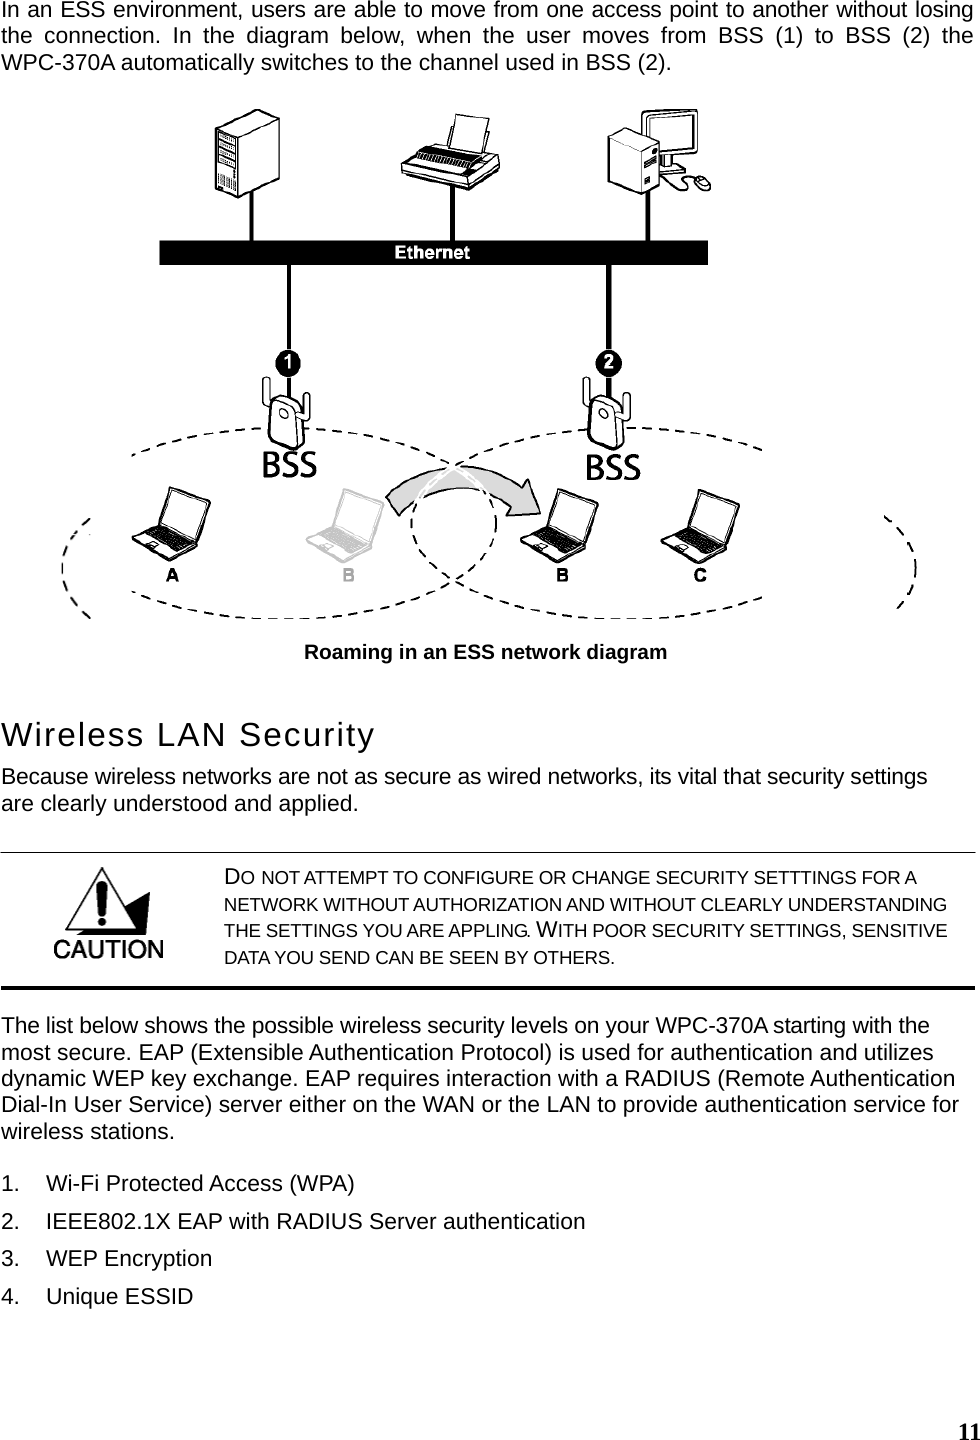  11In an ESS environment, users are able to move from one access point to another without losing the connection. In the diagram below, when the user moves from BSS (1) to BSS (2) the WPC-370A automatically switches to the channel used in BSS (2). Wireless LAN Security Because wireless networks are not as secure as wired networks, its vital that security settings are clearly understood and applied. The list below shows the possible wireless security levels on your WPC-370A starting with the most secure. EAP (Extensible Authentication Protocol) is used for authentication and utilizes dynamic WEP key exchange. EAP requires interaction with a RADIUS (Remote Authentication Dial-In User Service) server either on the WAN or the LAN to provide authentication service for wireless stations.  1.  Wi-Fi Protected Access (WPA) 2.  IEEE802.1X EAP with RADIUS Server authentication 3. WEP Encryption 4. Unique ESSID  Roaming in an ESS network diagram  DO NOT ATTEMPT TO CONFIGURE OR CHANGE SECURITY SETTTINGS FOR A NETWORK WITHOUT AUTHORIZATION AND WITHOUT CLEARLY UNDERSTANDING THE SETTINGS YOU ARE APPLING. WITH POOR SECURITY SETTINGS, SENSITIVE DATA YOU SEND CAN BE SEEN BY OTHERS. 